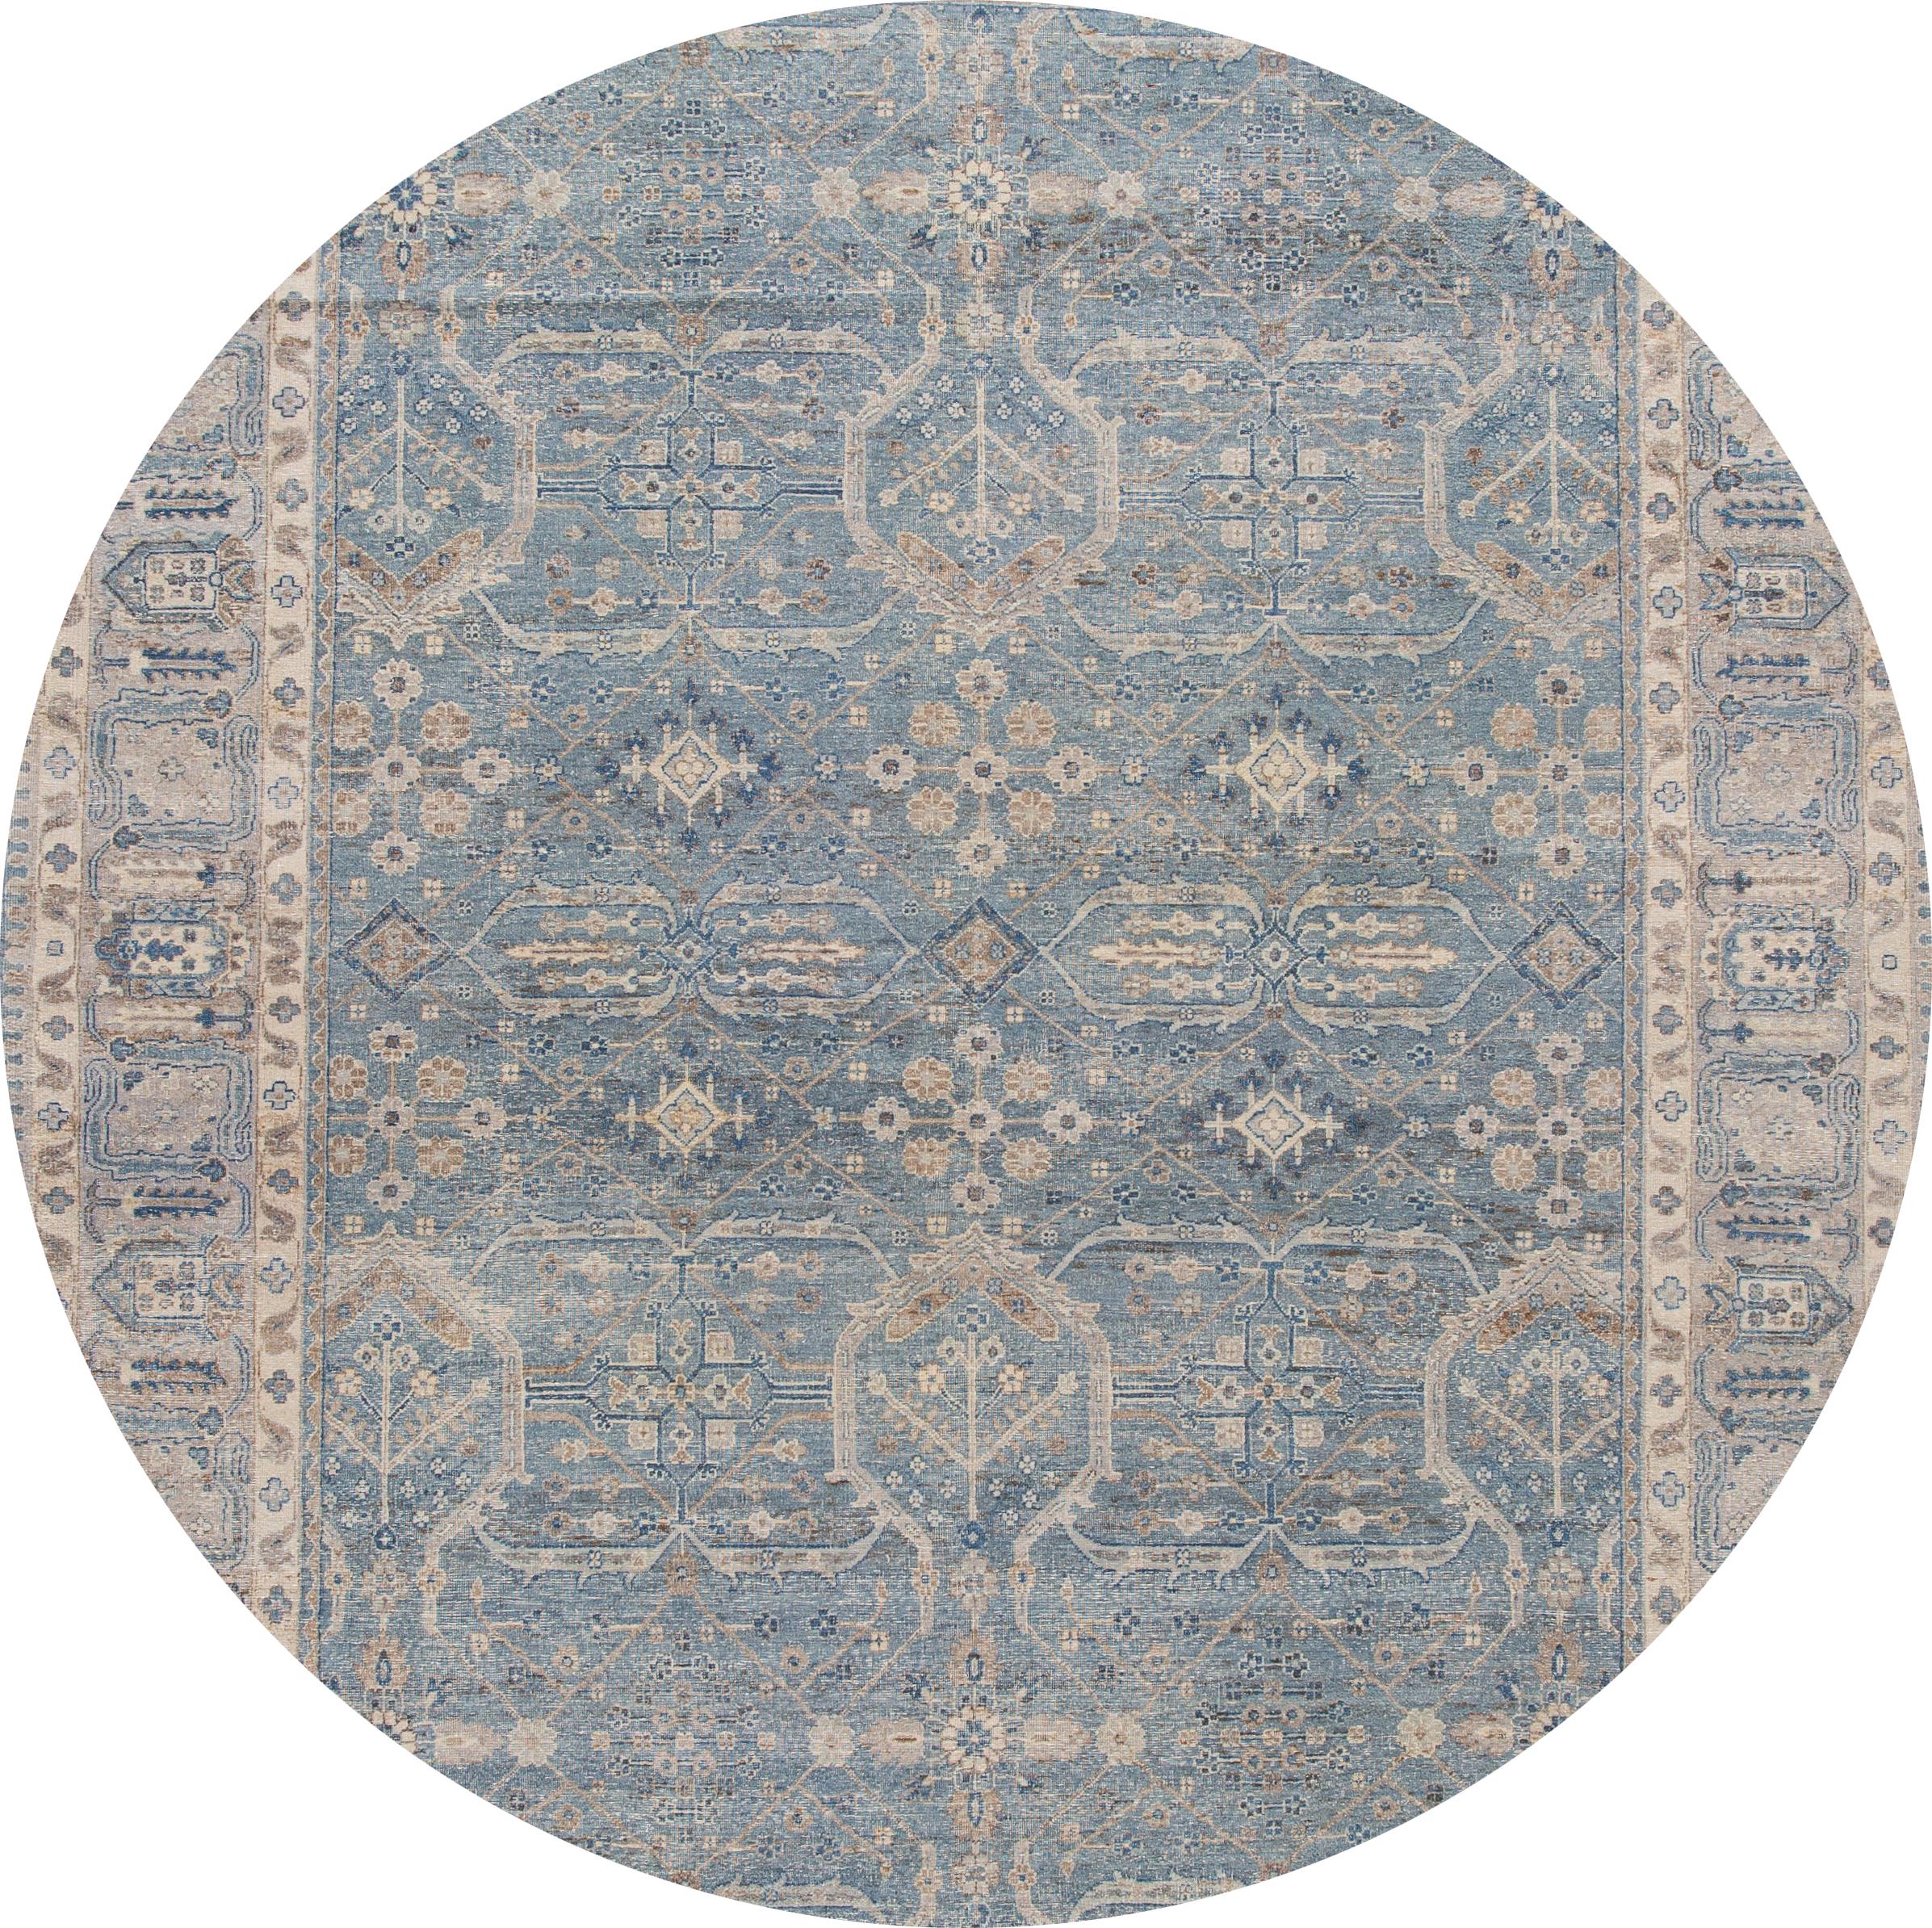 A contemporary Tabriz style rug with a tan field and ivory and blue accents in a symmetrical, interconnected floral and vine design. This hand knotted wool.
This rug measures: 9